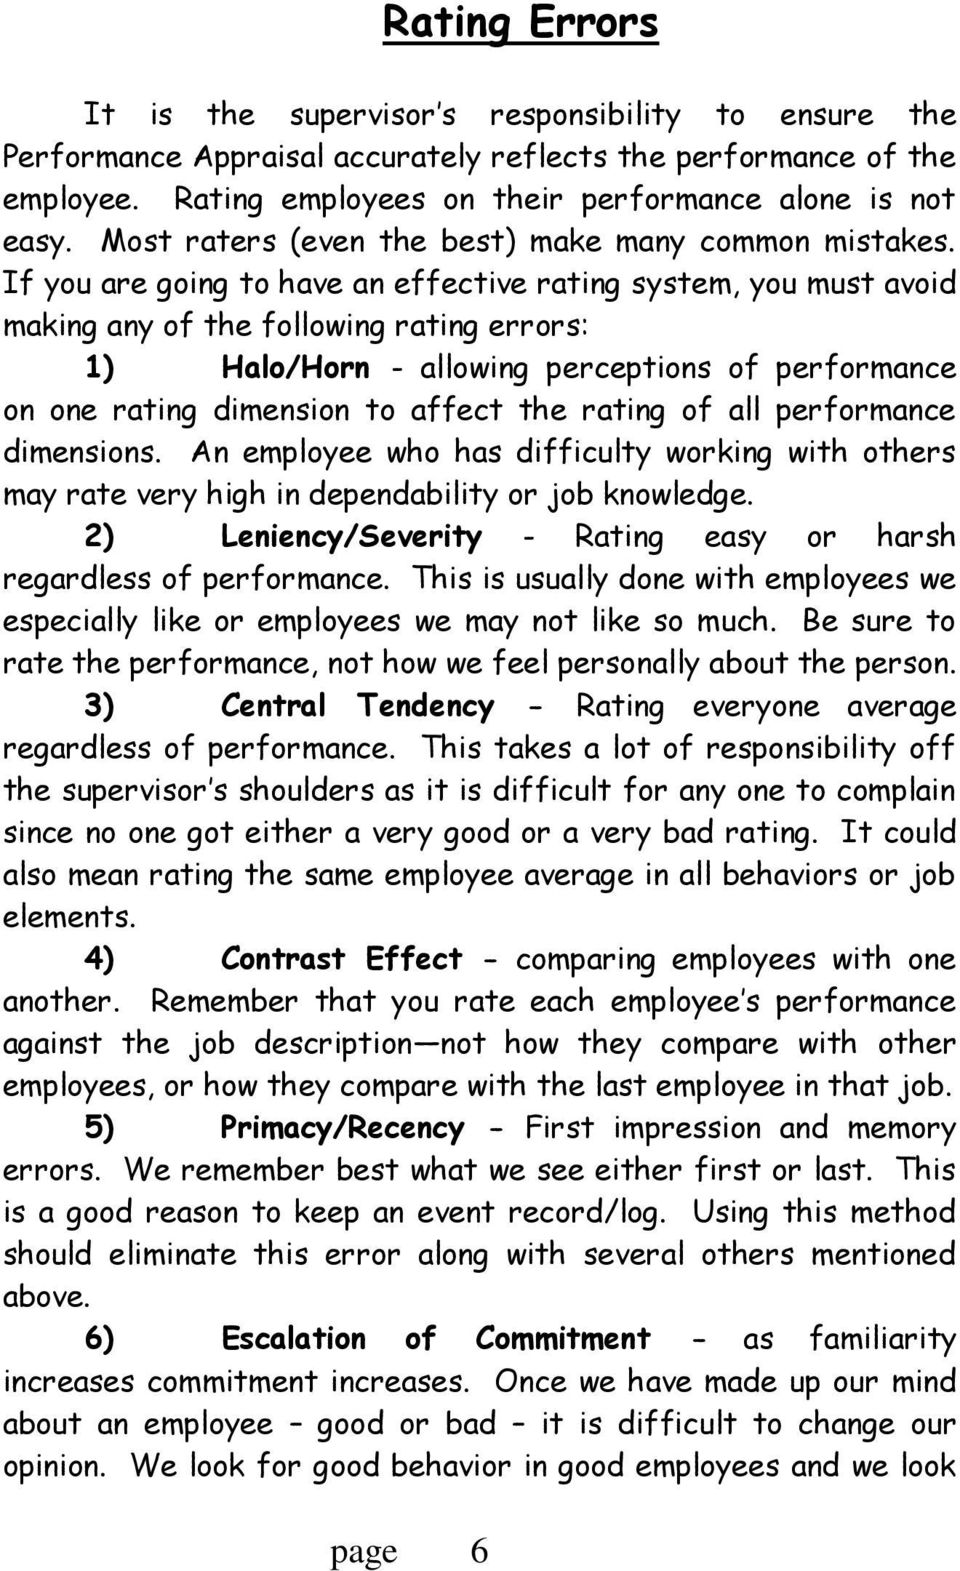 If you are going to have an effective rating system, you must avoid making any of the following rating errors: 1) Halo/Horn - allowing perceptions of performance on one rating dimension to affect the